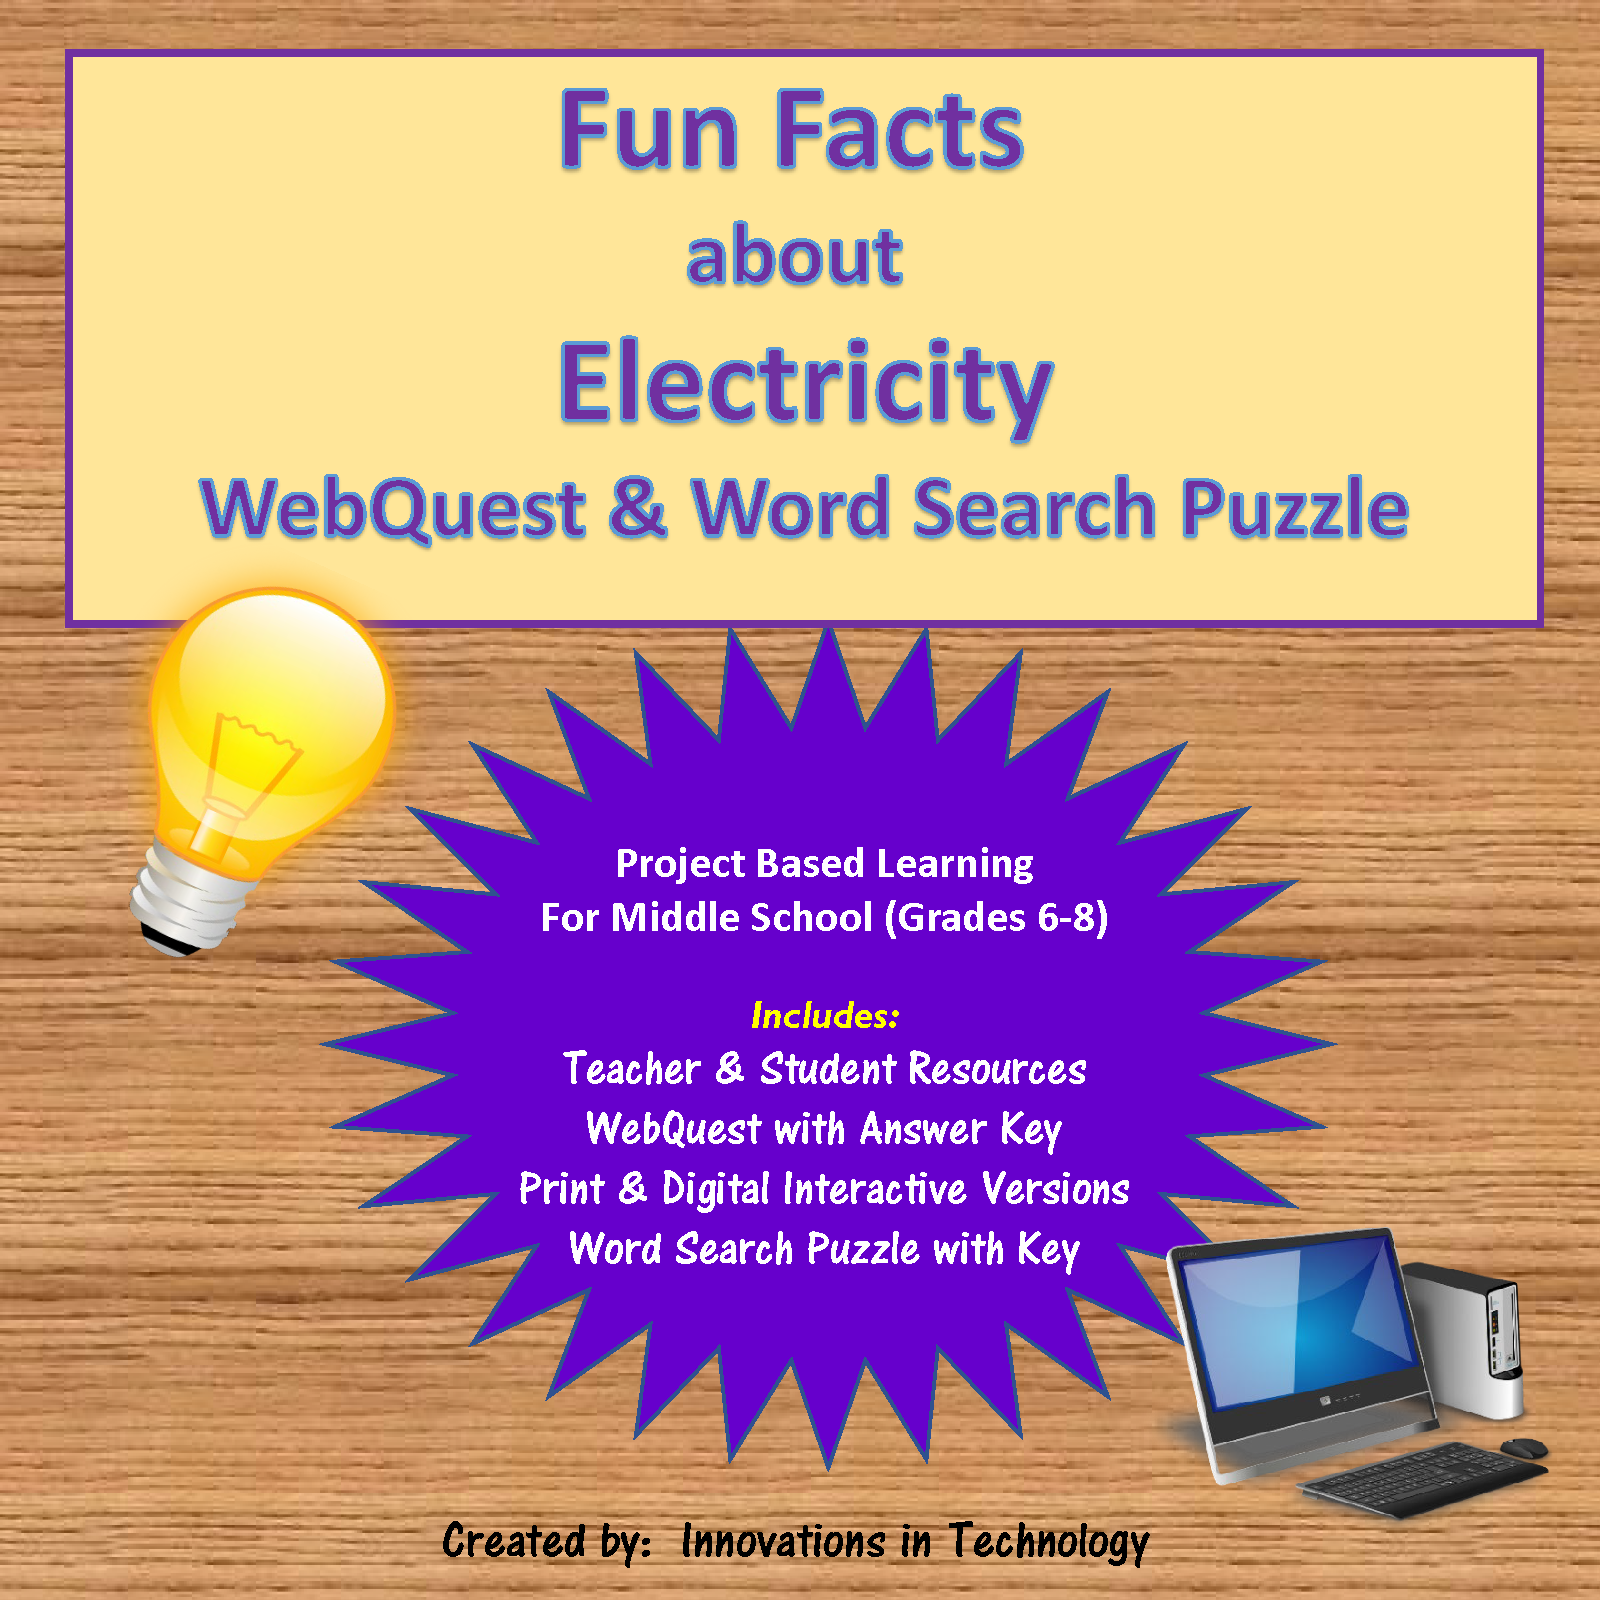 Fun Facts about Electricity - WebQuest & Word Search Puzzle